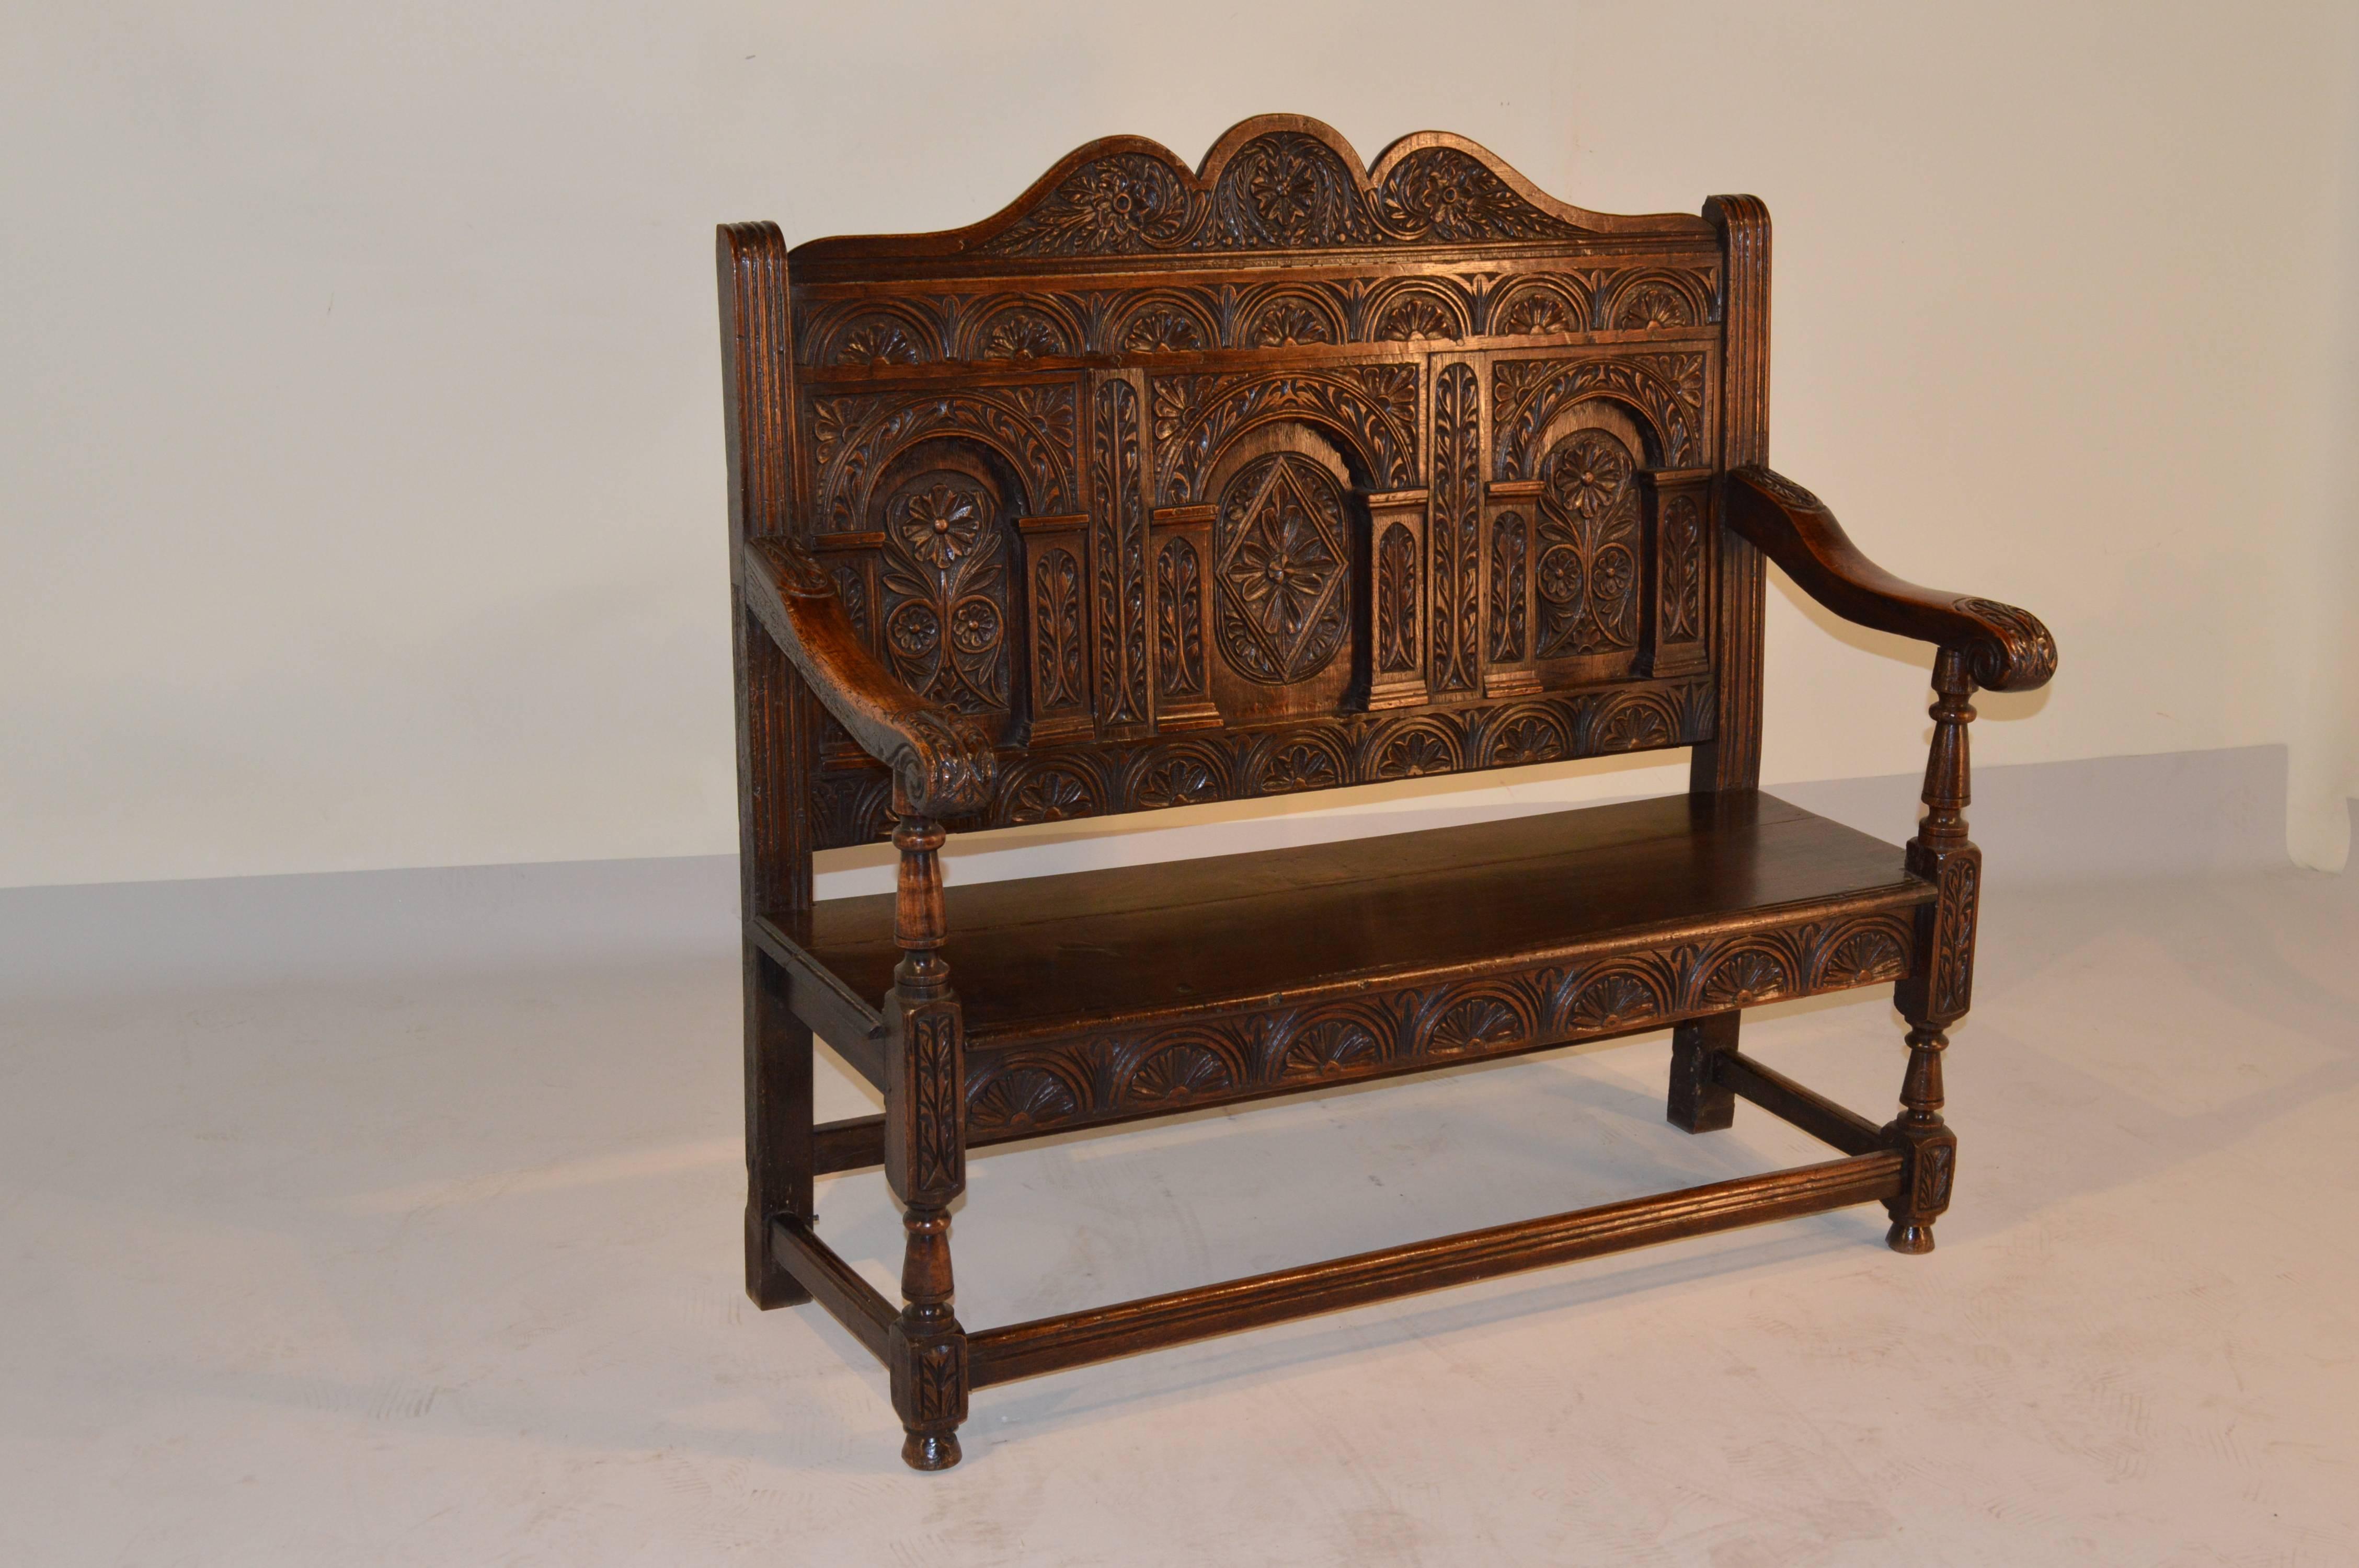 Early 19th century English oak carved settee.  The back is splendidly scalloped at the top following down to hand carved decorated raised panels with arched decoration.  The arms are scrolled and supported on hand turned supports.  The apron is